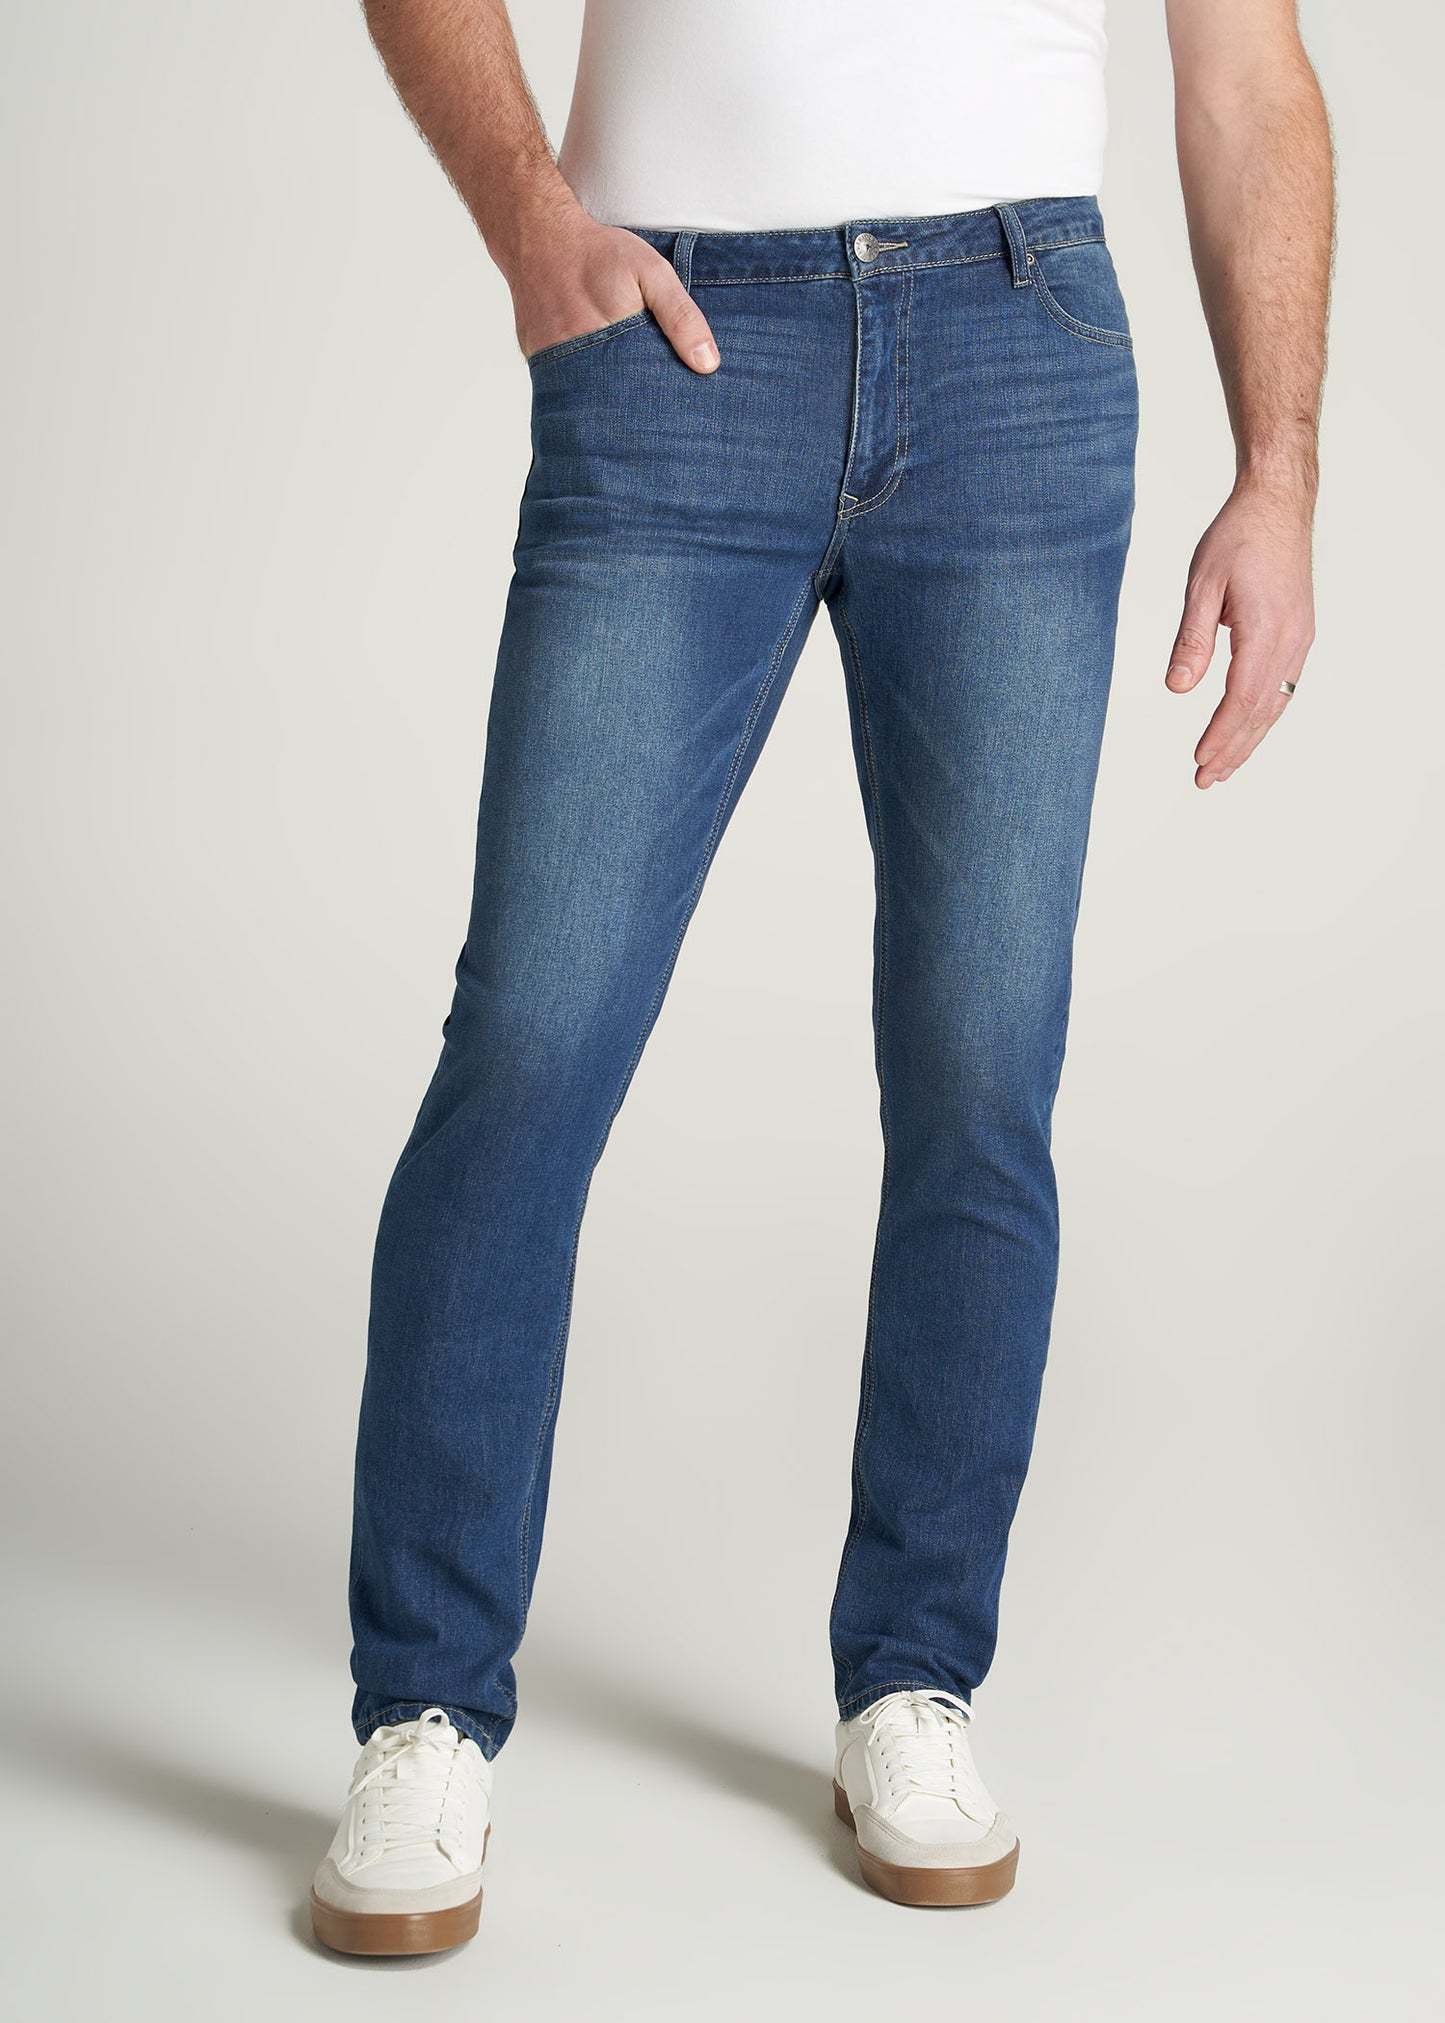 Tall guy wearing American Tall's Carman Tapered Jeans in the color Classic Blue.